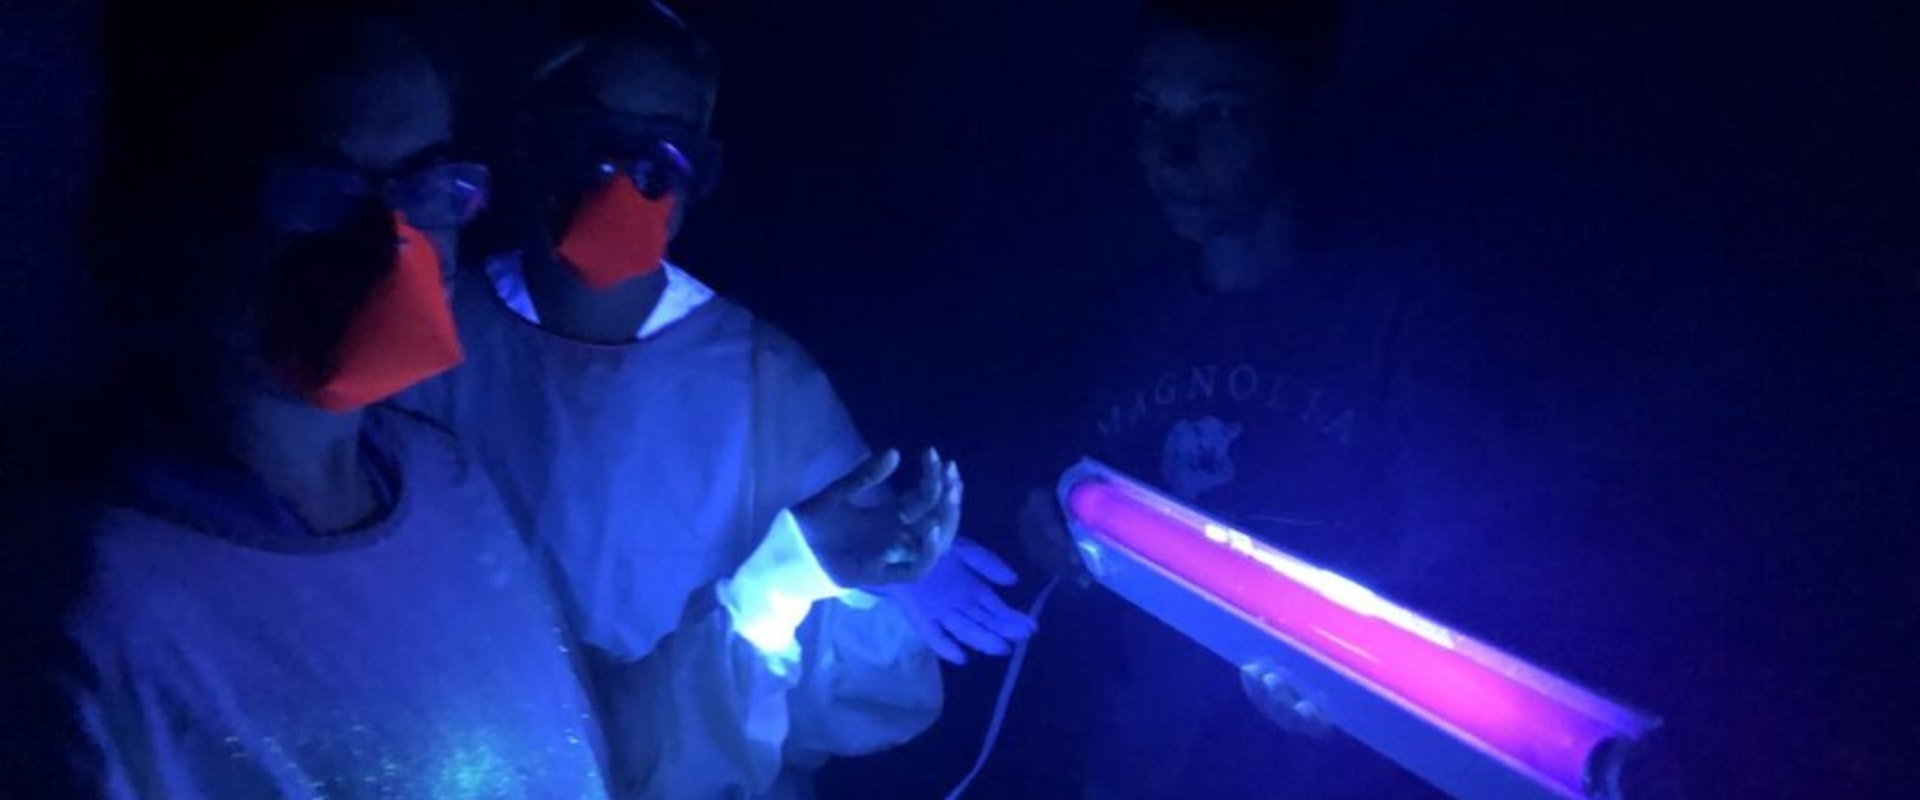 The Importance of PPE for UV Light Exposure: An Expert's Perspective